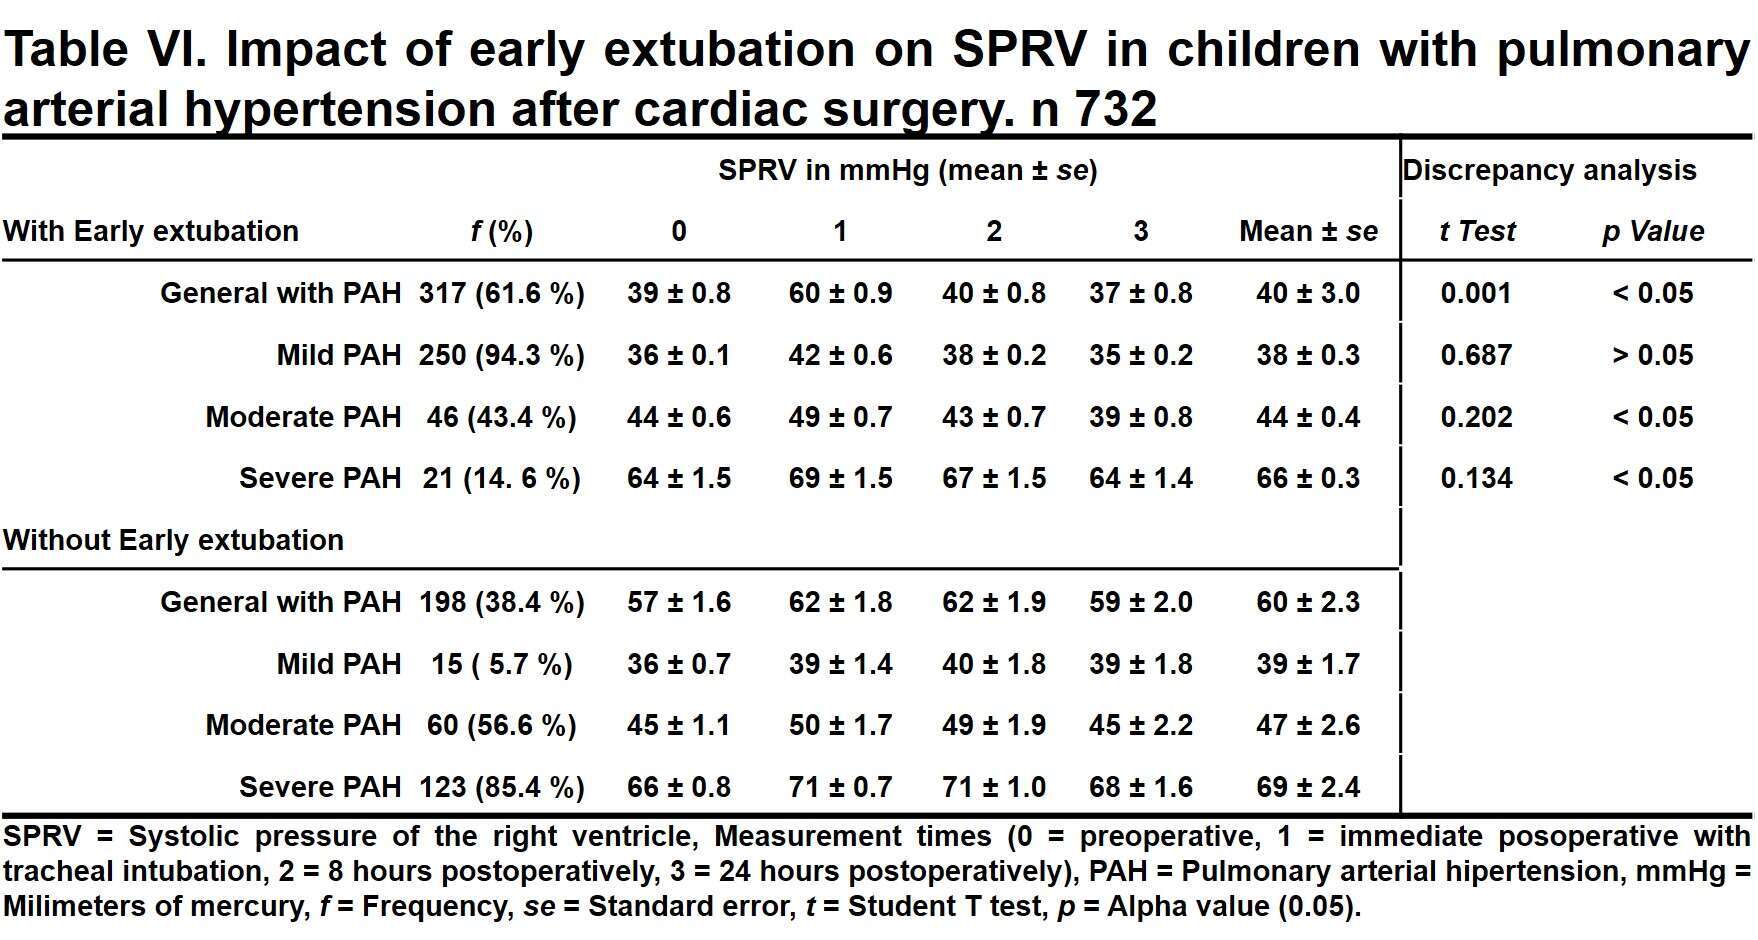 Table VI. Impact of early extubation on SPRV in children with pulmonary arterial hypertension after cardiac surgery